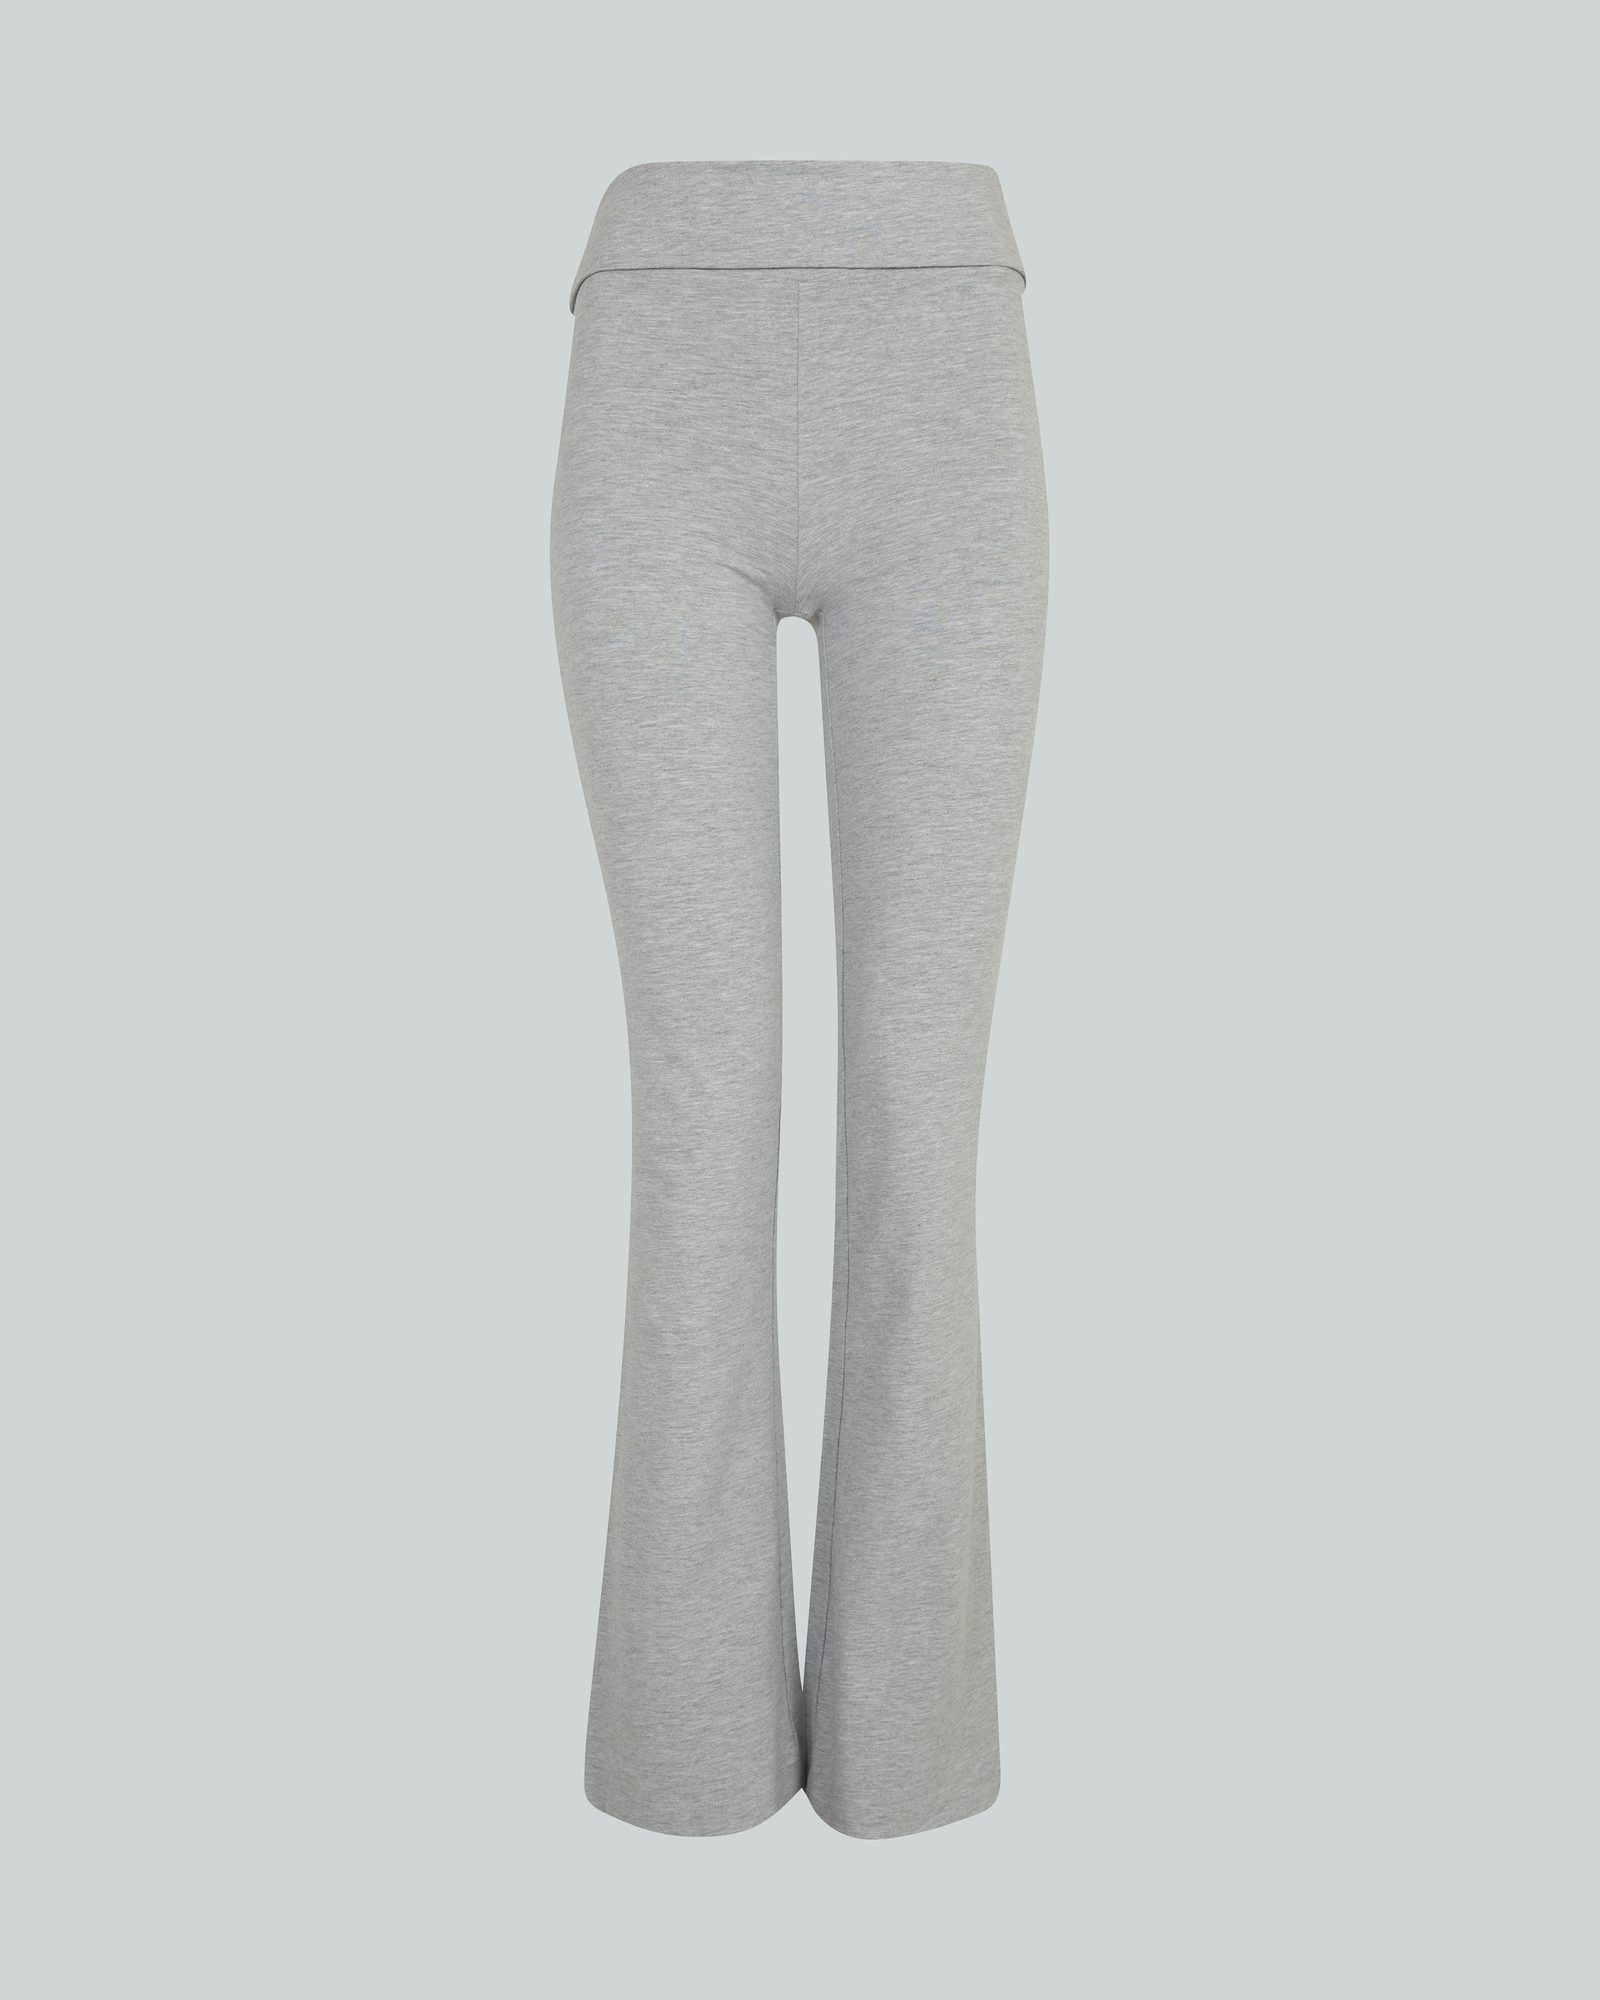 Buy U.S. CROWN Grey Net Stretchable Yoga Pant for Women at